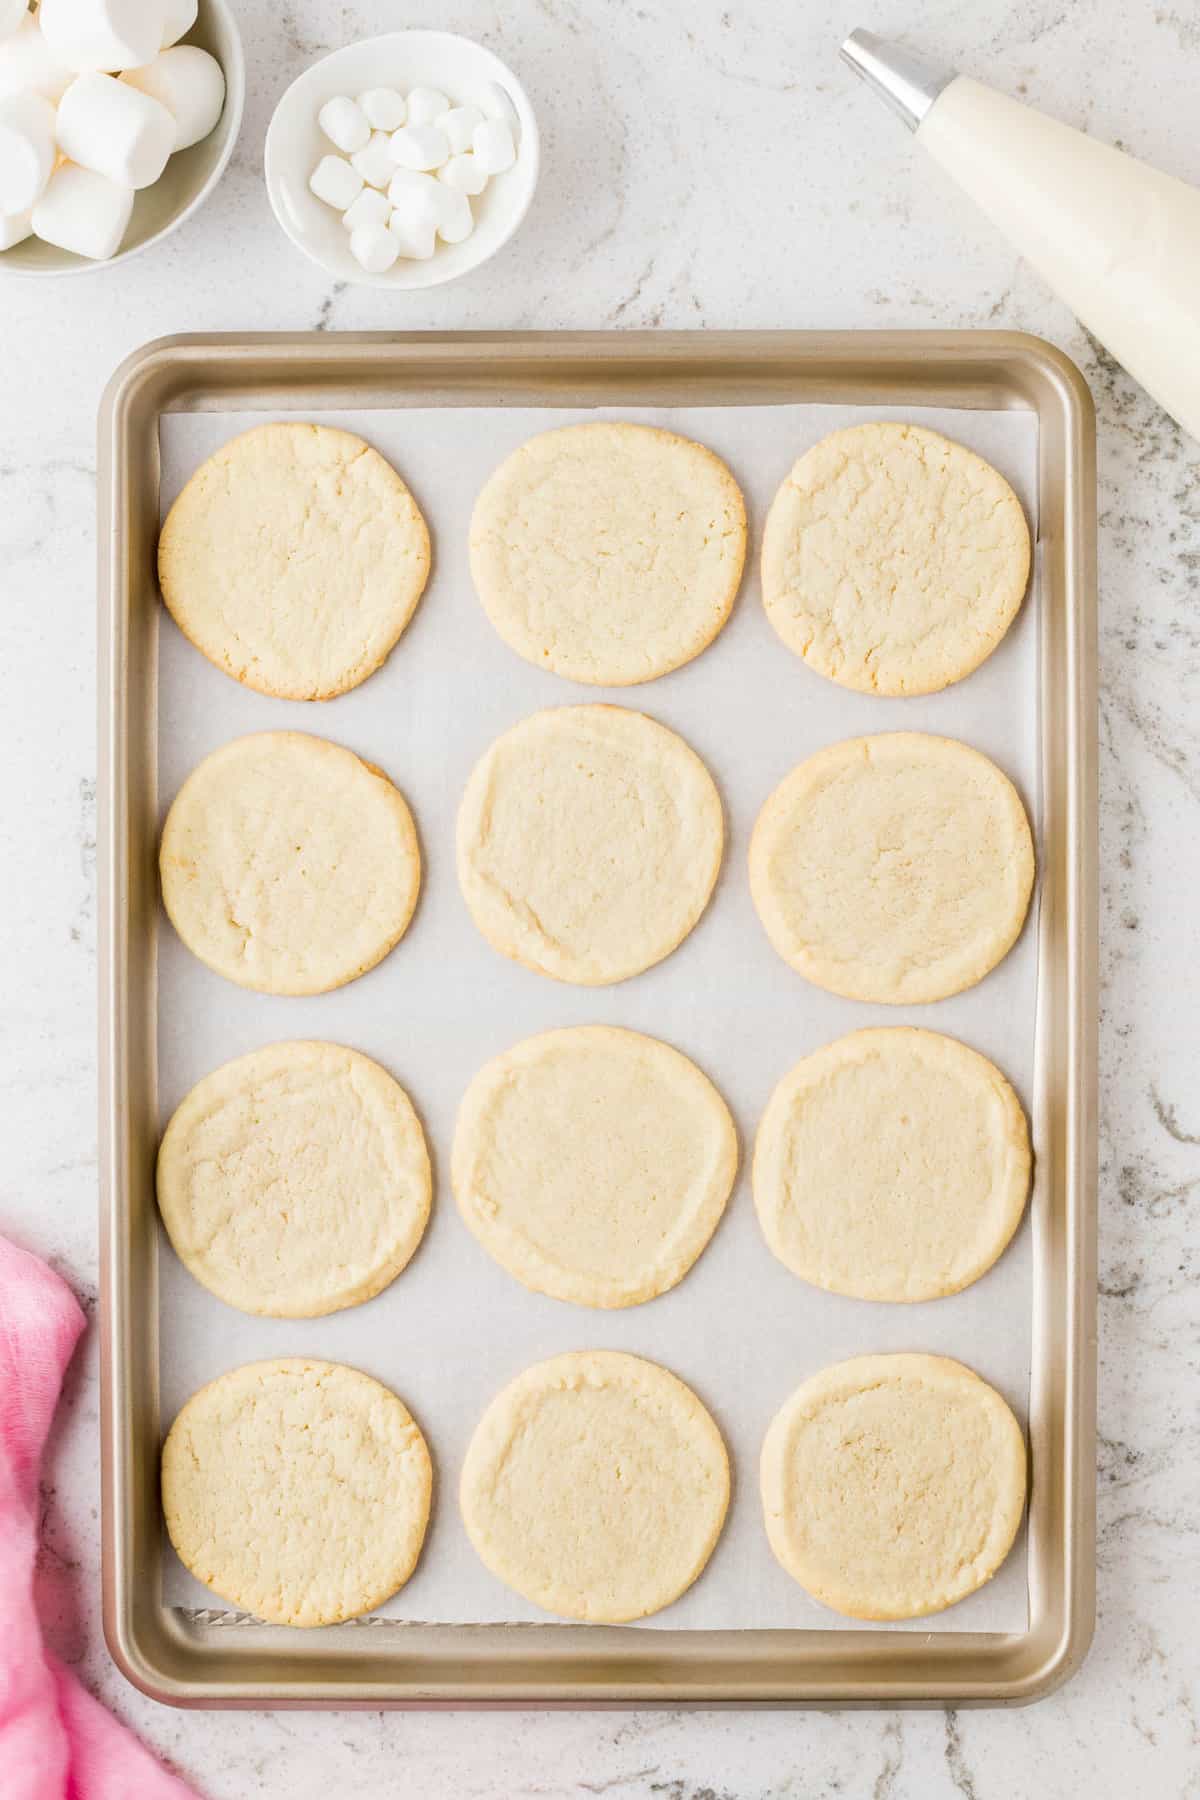 Cut the Cookie Roll into 1/2 inch slices and place on a baking sheet with parchment paper. Bake according to the package.